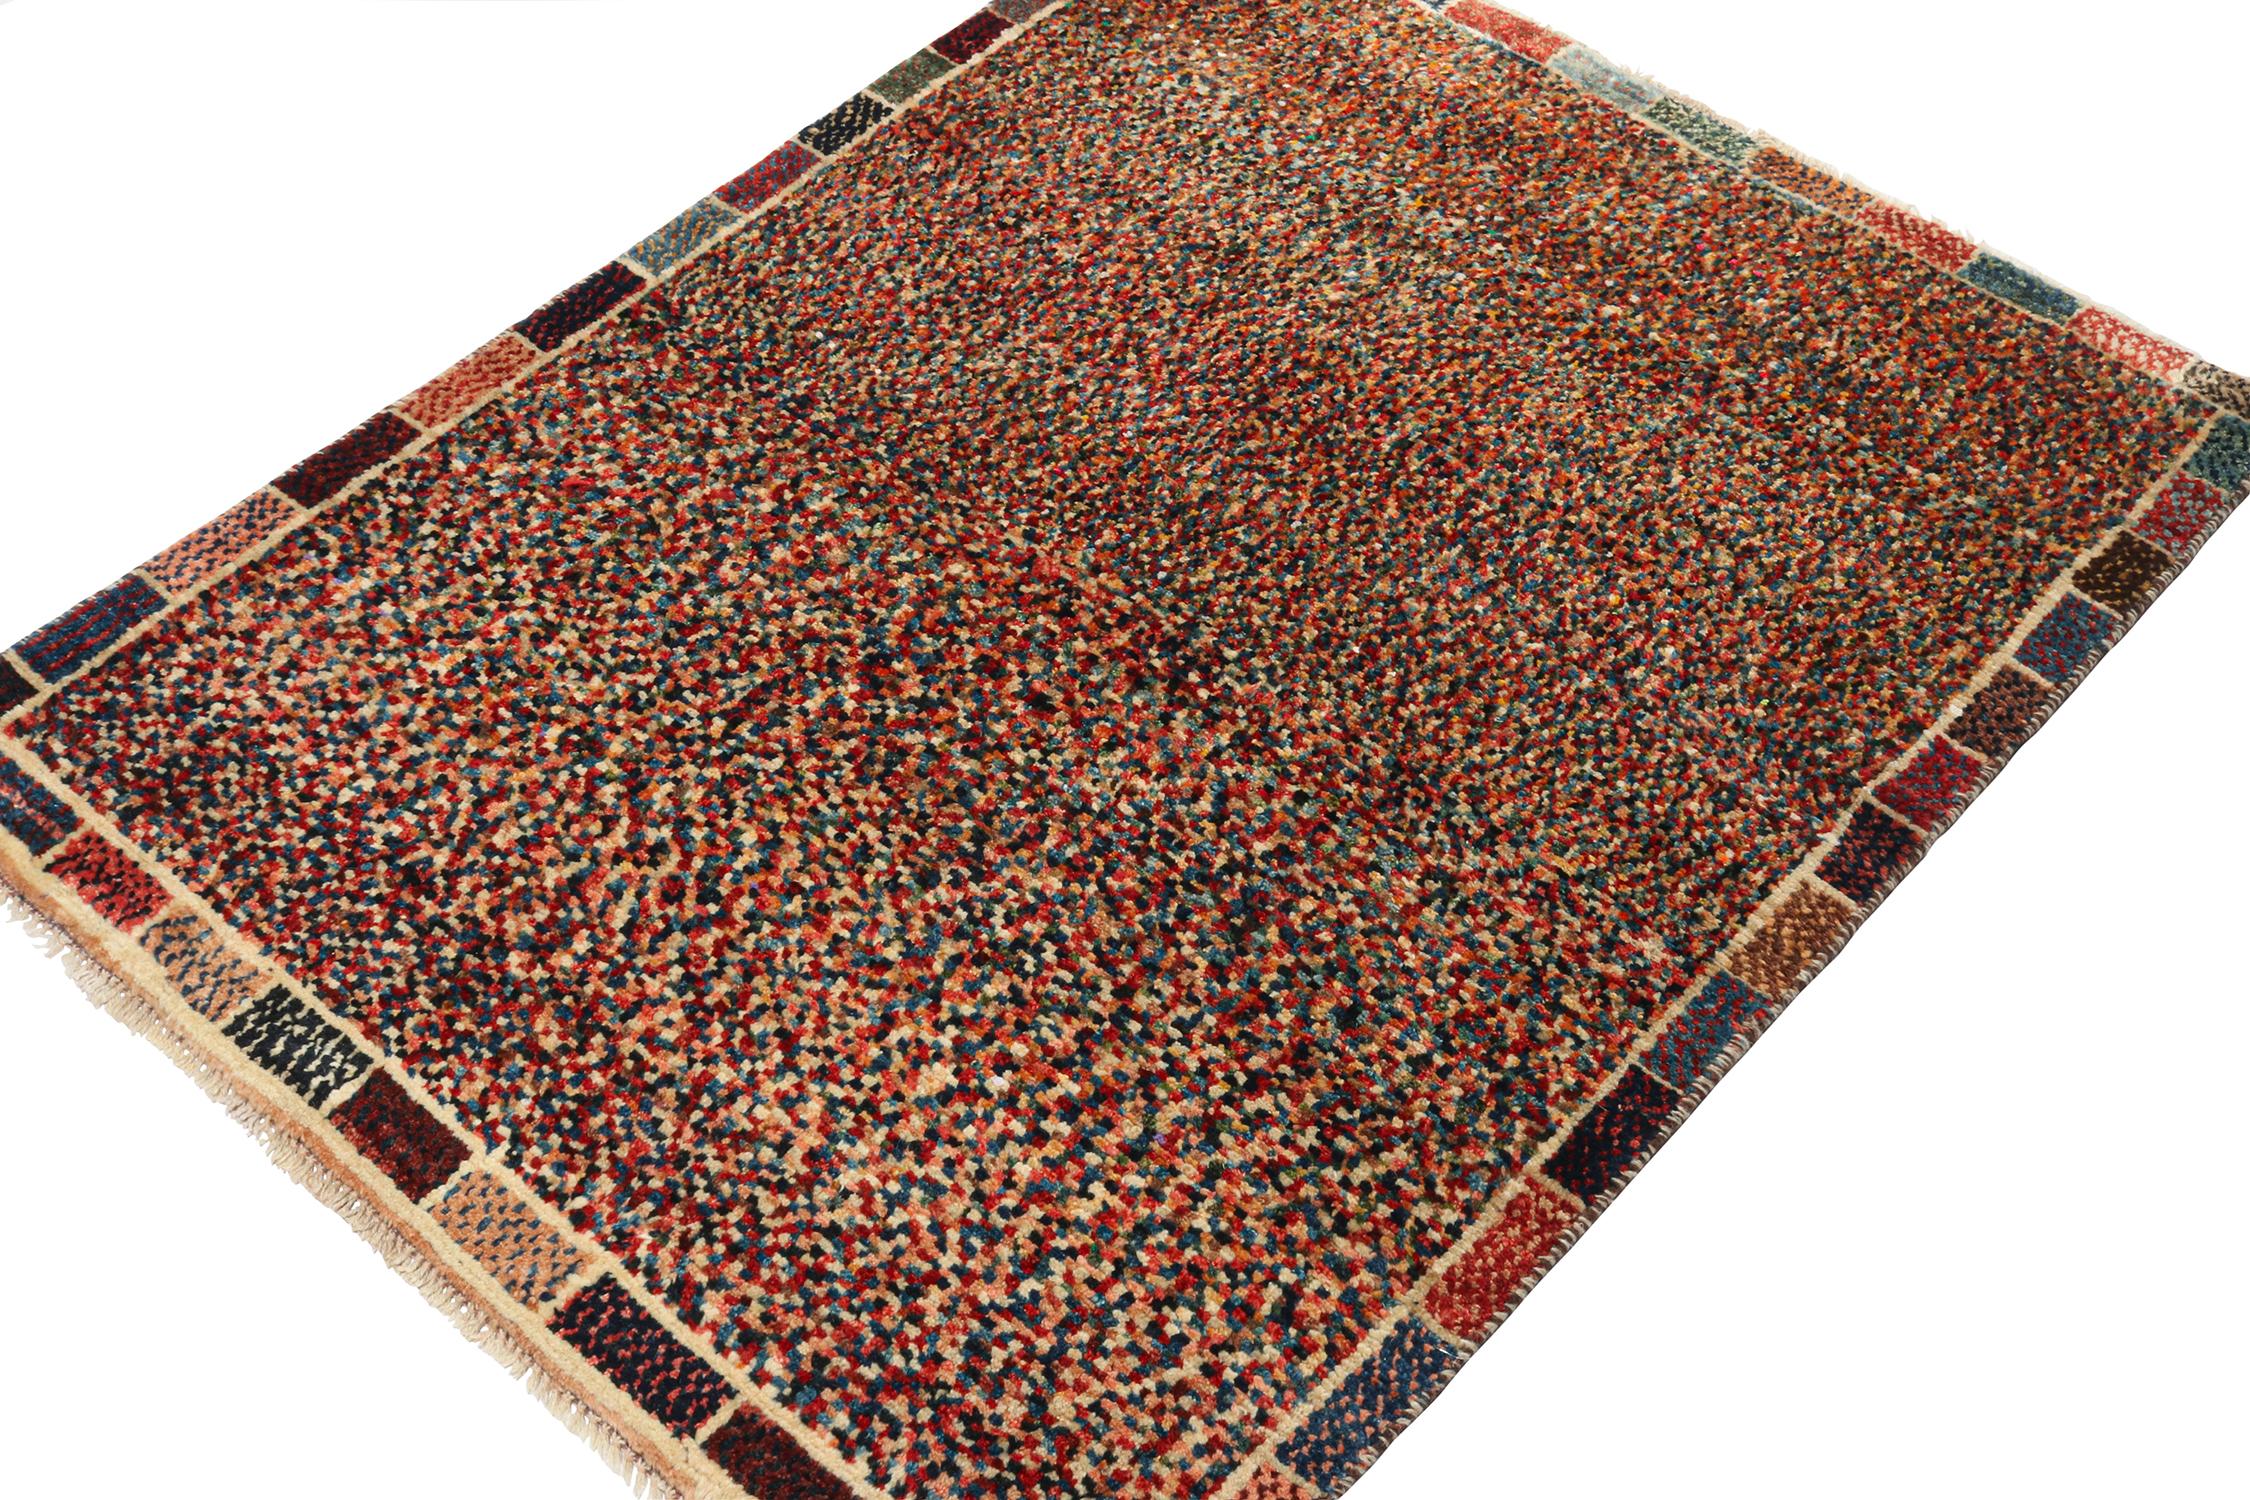 A vintage 3x4 Persian Gabbeh rug, making a grand entry to Rug & Kilim’s curation of rare tribal pieces. Hand-knotted in wool, originating circa 1950-1960.

On the Design:

This piece features a gorgeous play of polychromatic tones to complement